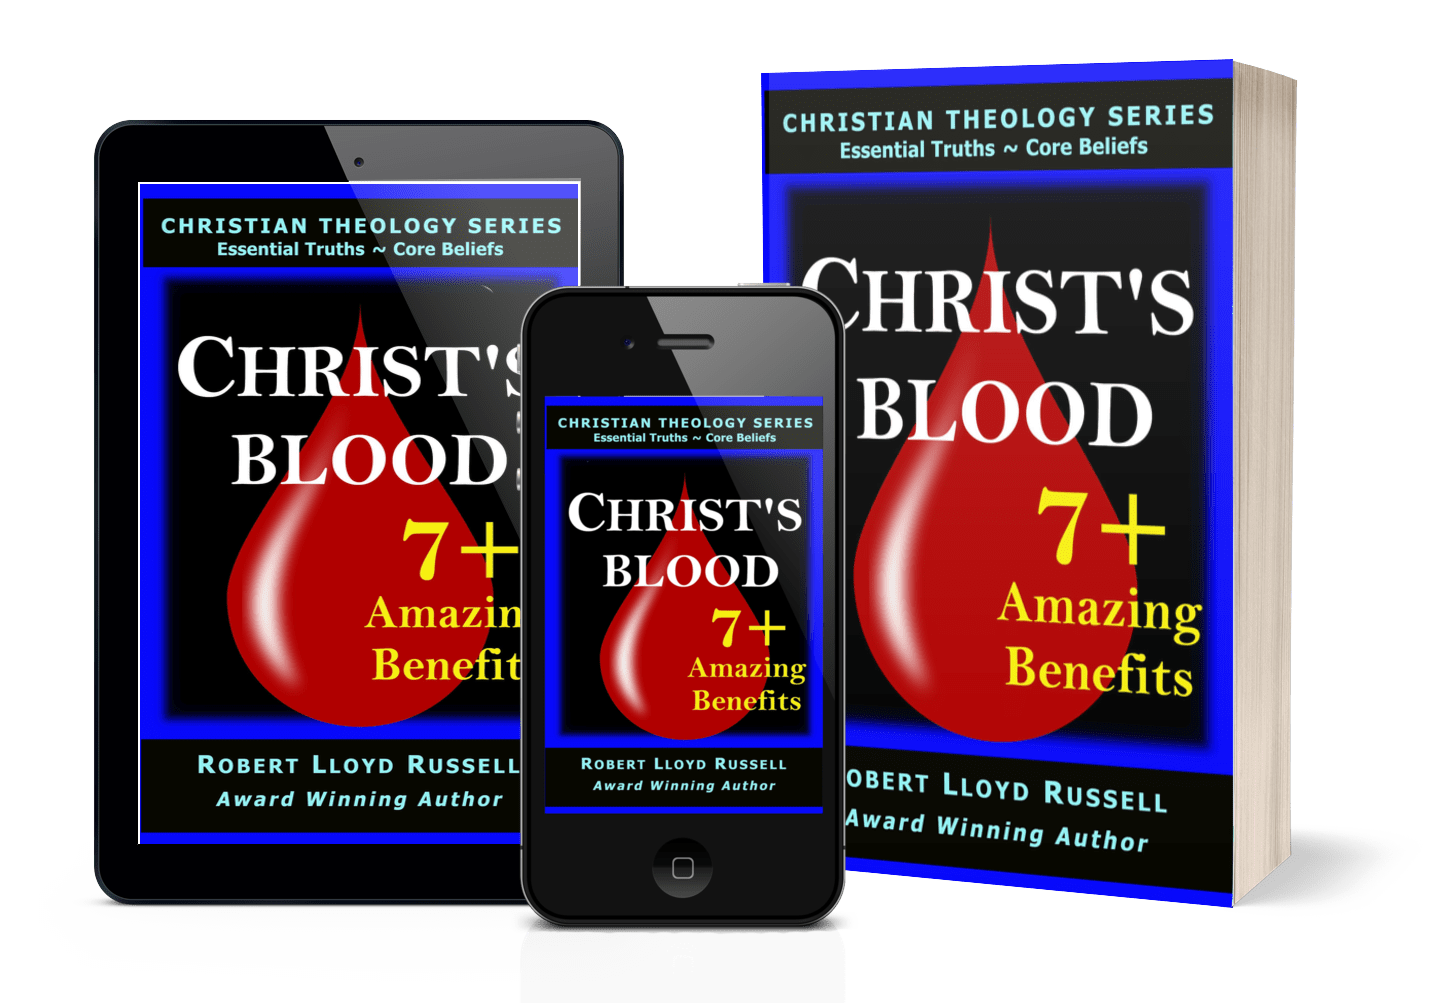 Book cover of CHRIST’S BLOOD, 7+ Amazing Benefits.